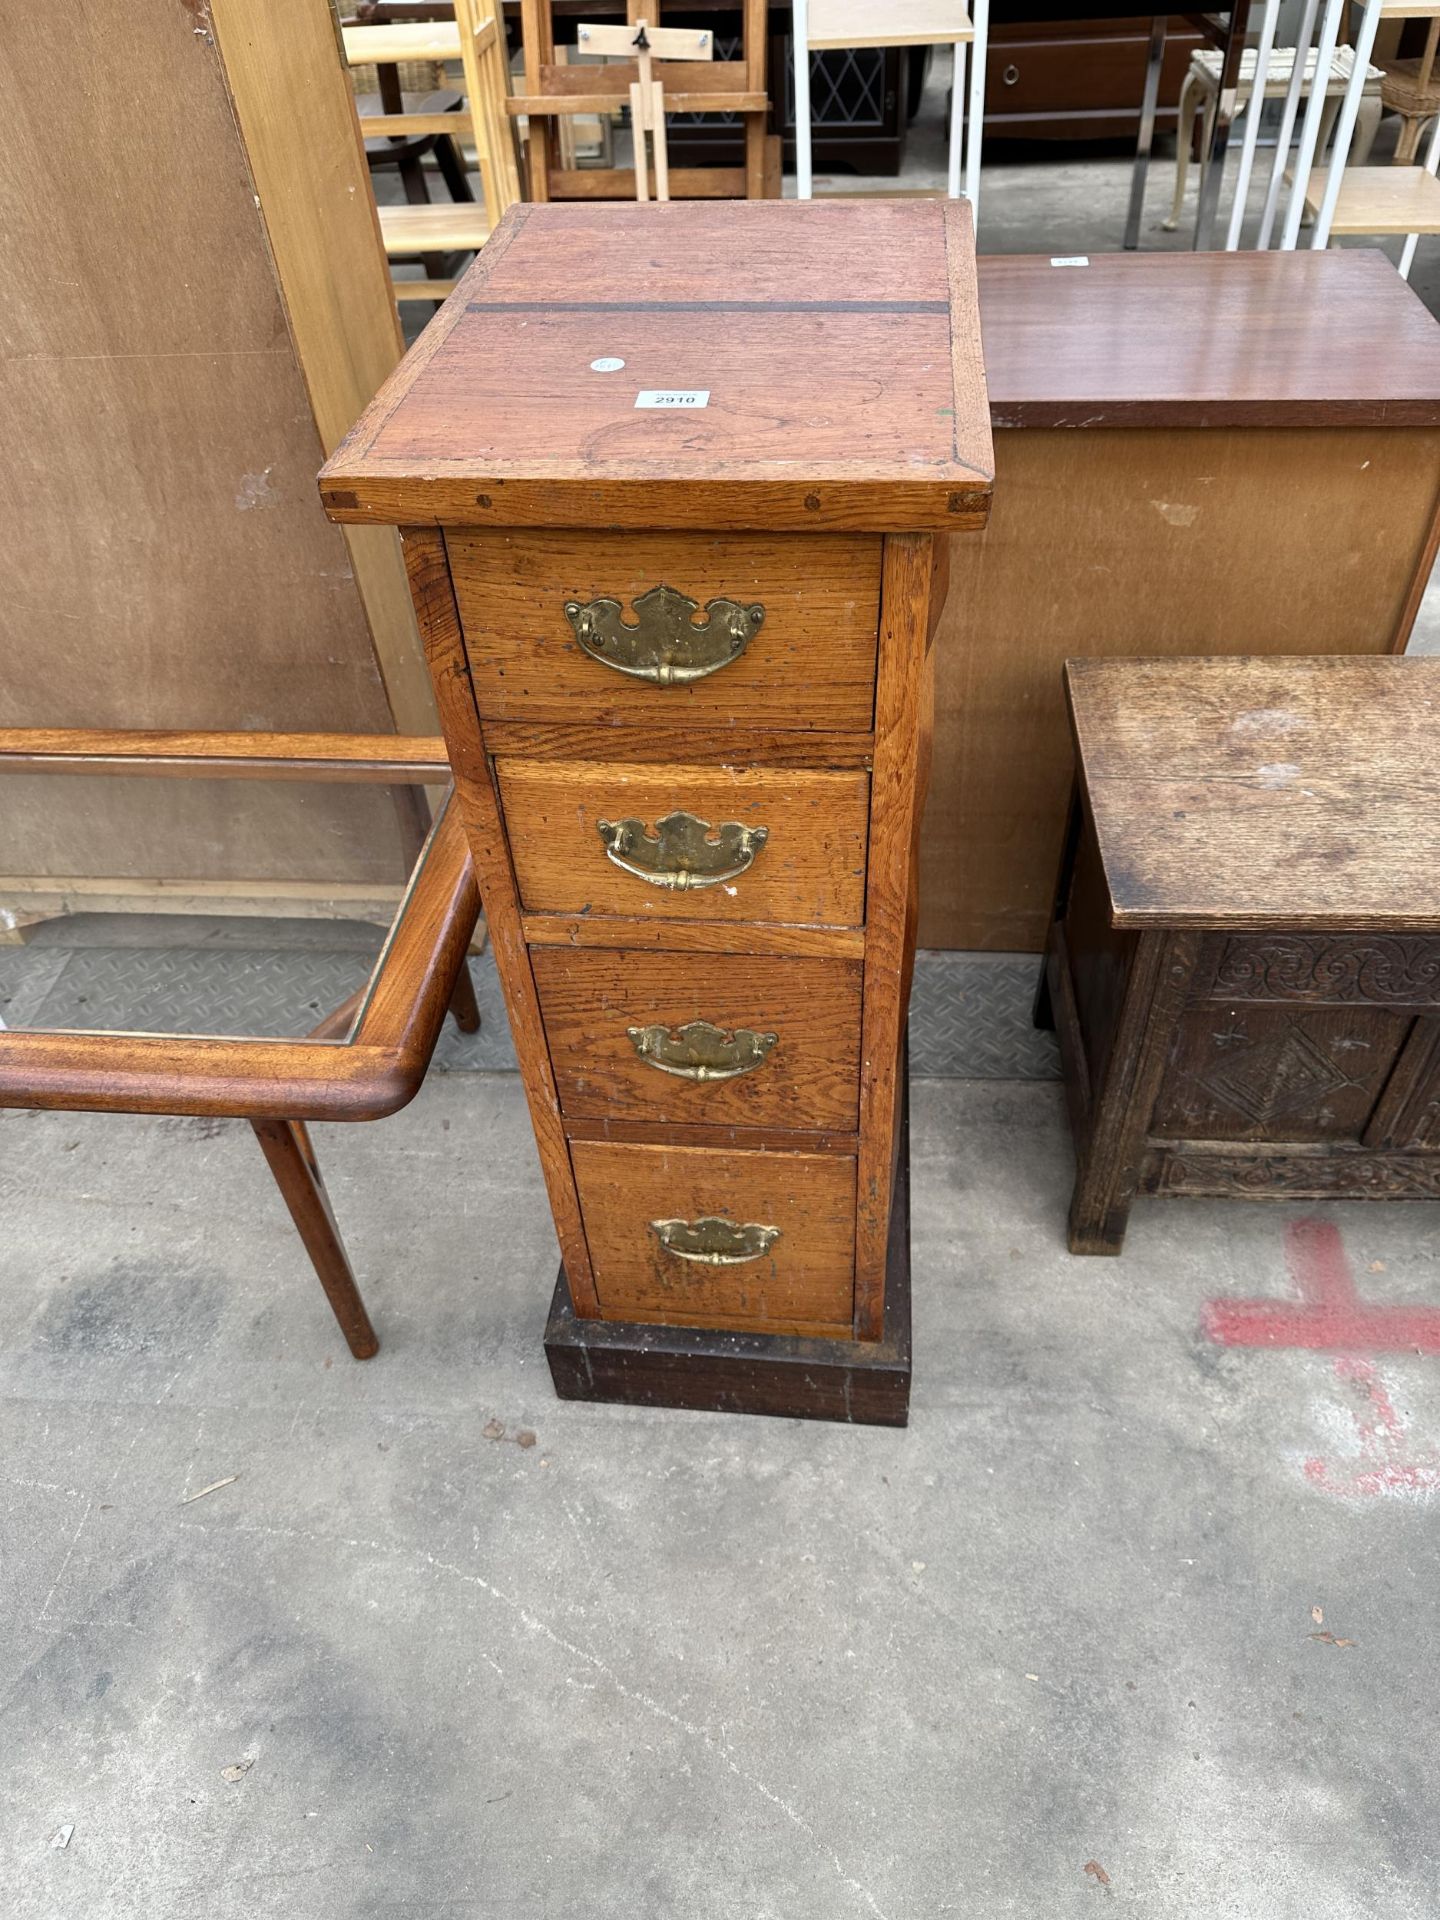 A NARROW OAK EDWARDIAN CHEST OF FOUR GRADUATED DRAWERS WITH BRASS HANDLES, 13" WIDE CONTAINING A